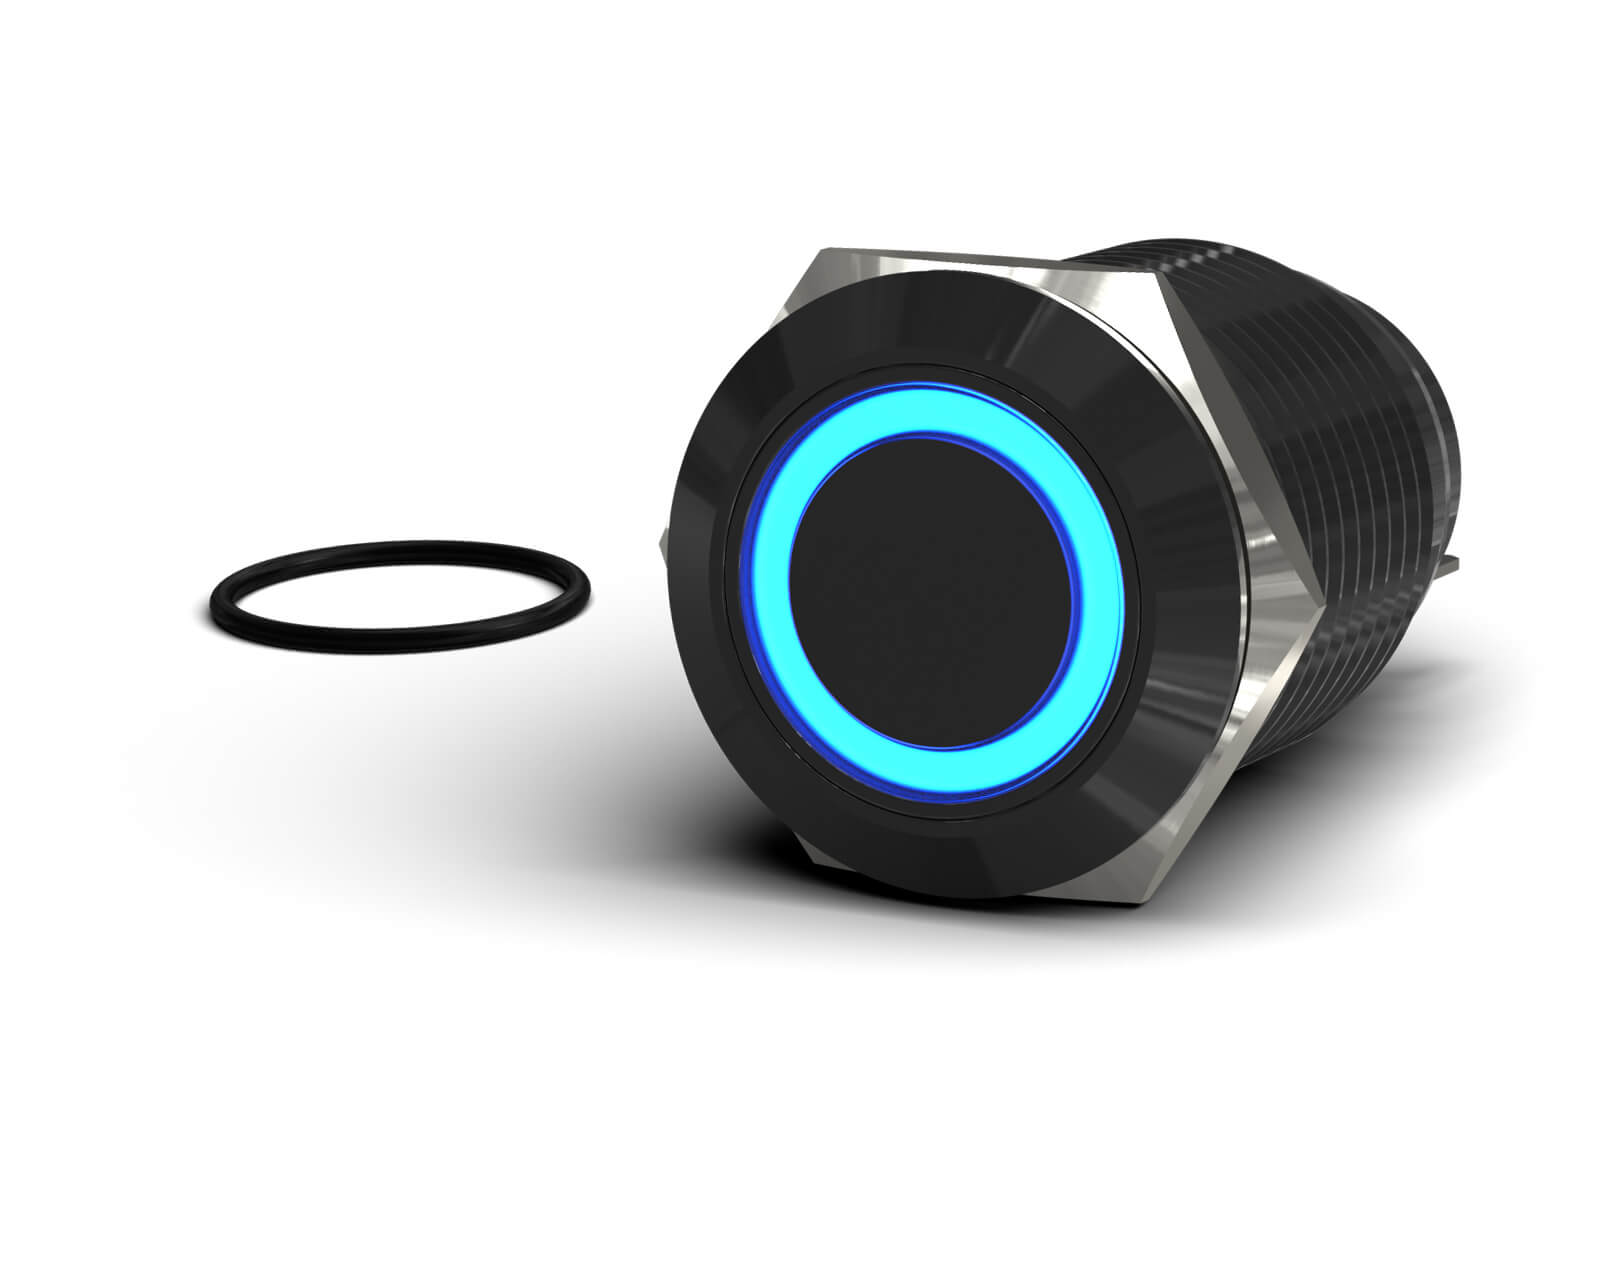 PrimoChill Black Aluminum Latching Vandal Resistant Switch - 22mm - PrimoChill - KEEPING IT COOL Blue LED Ring